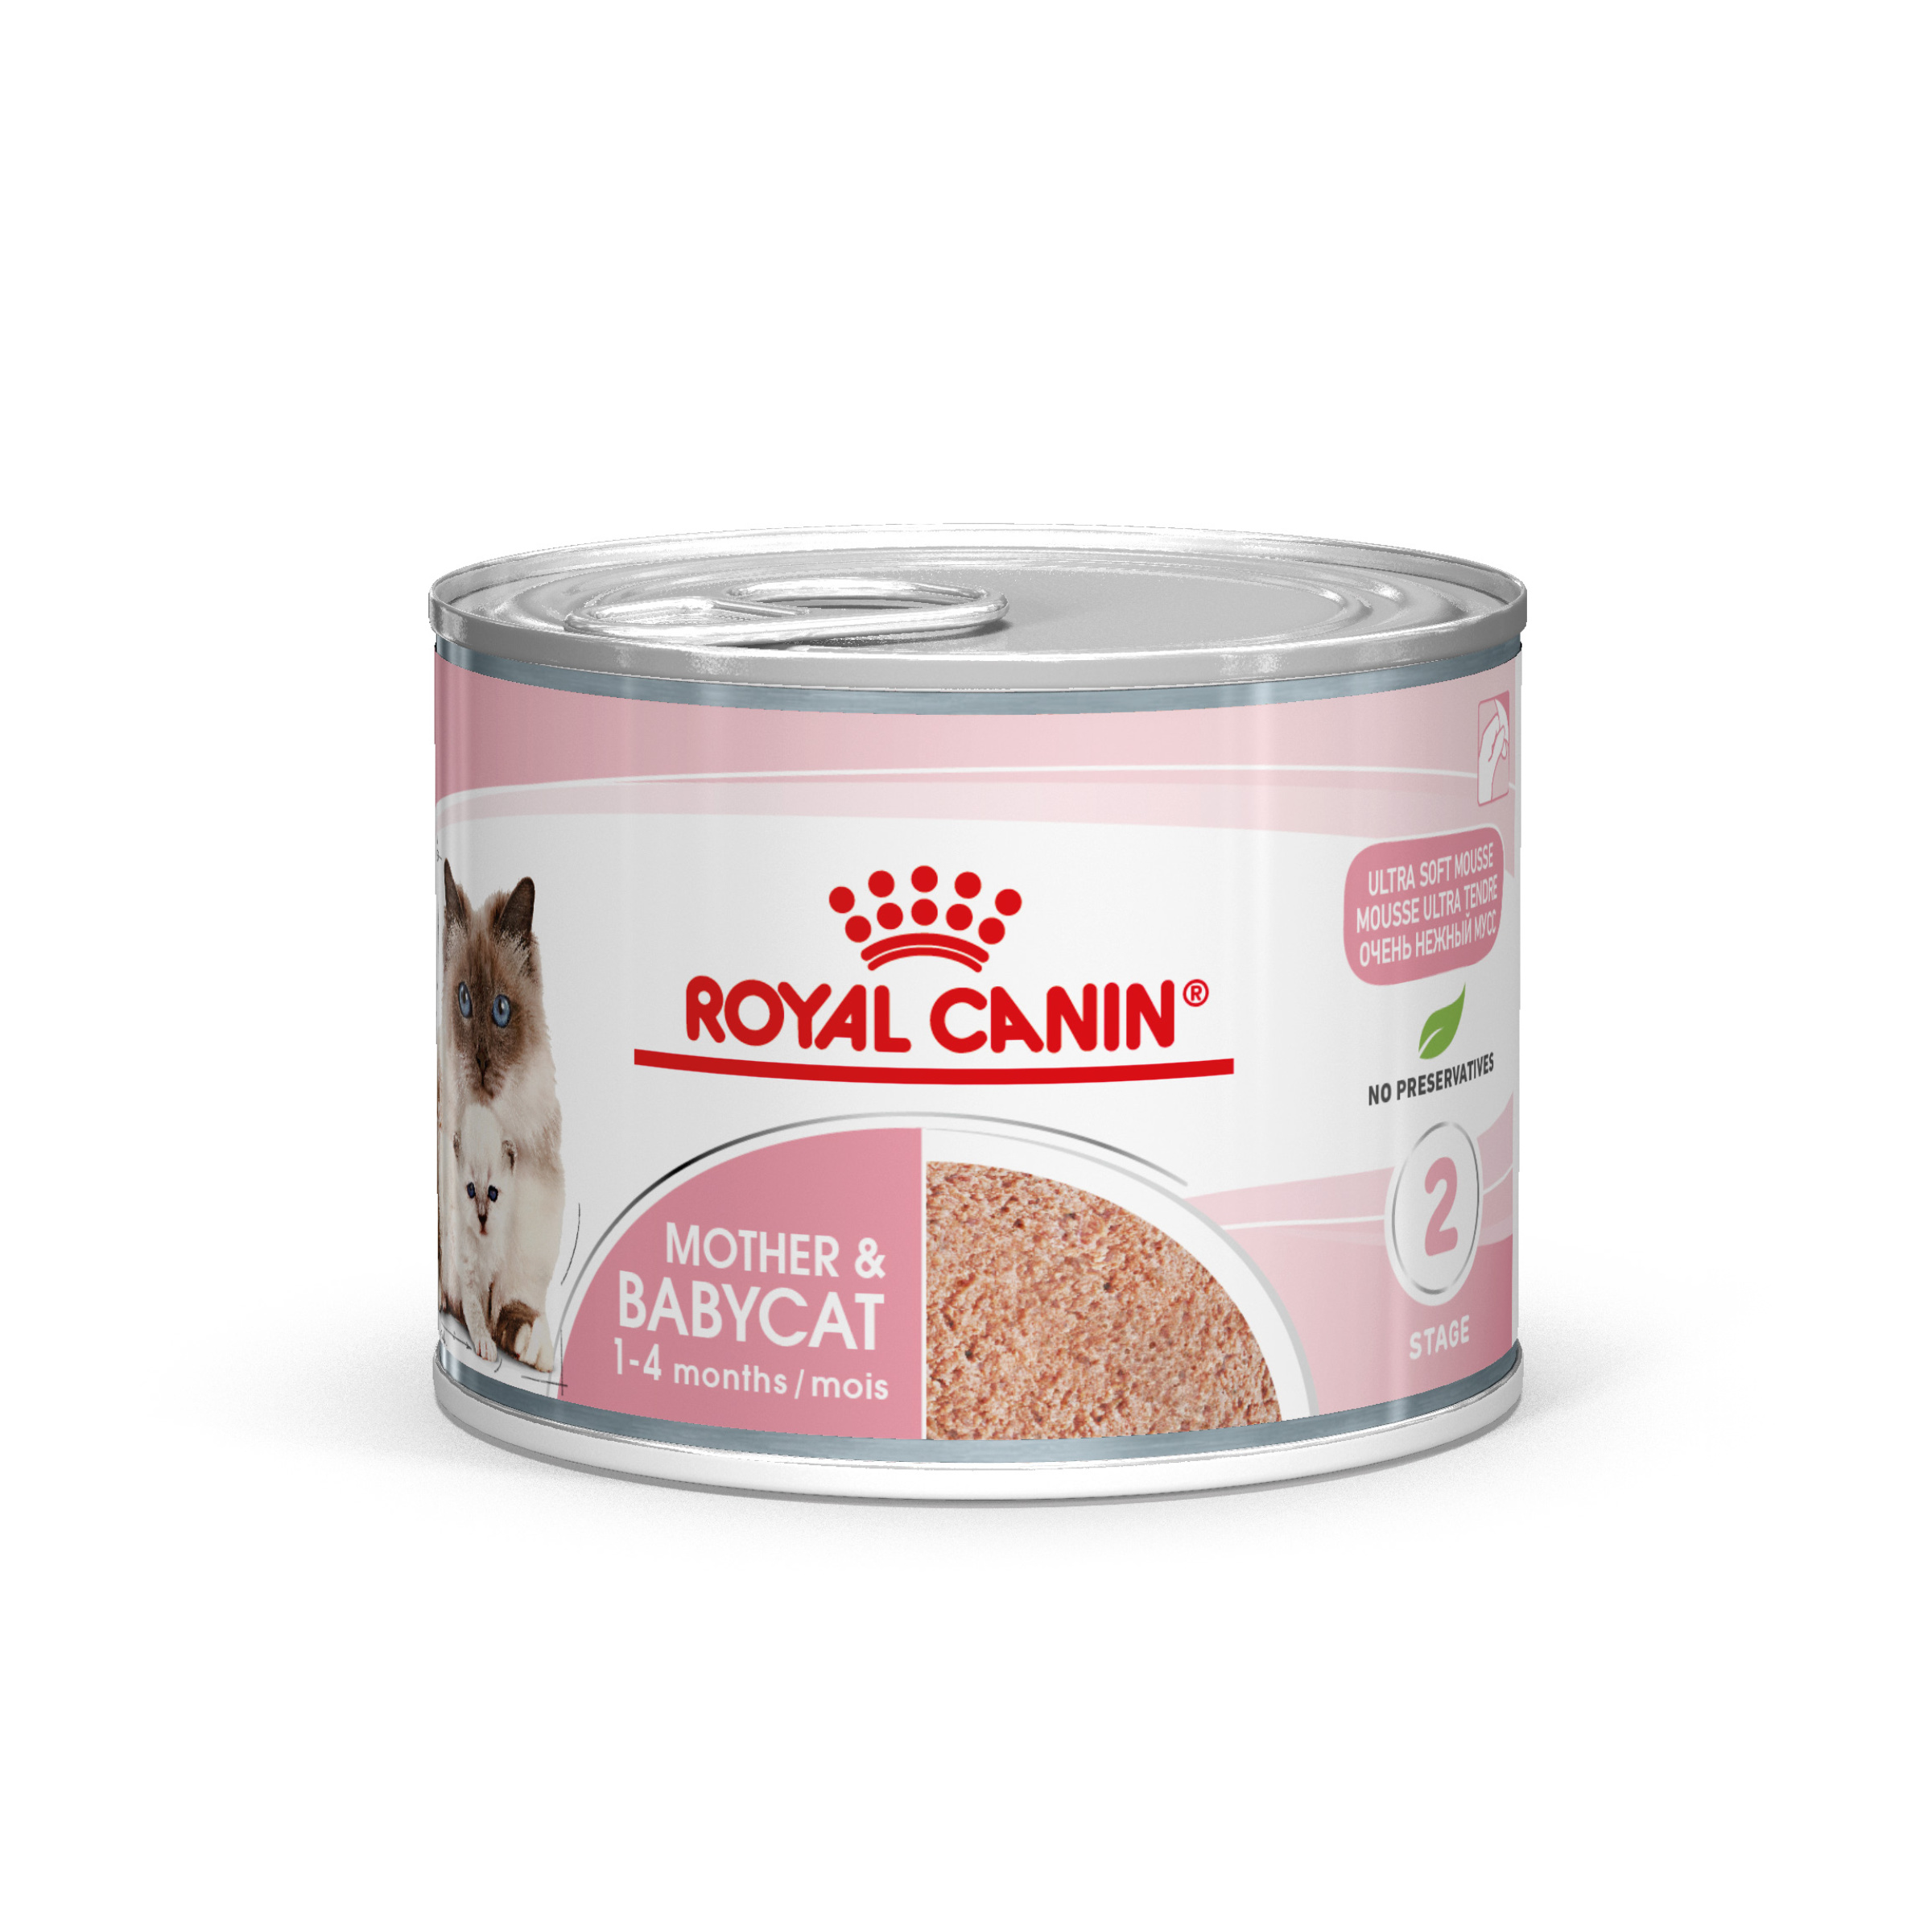 Royal Canin mother&babycat - tendre mousse chatte et chaton 0 a 4 mois - 0,195kg - 